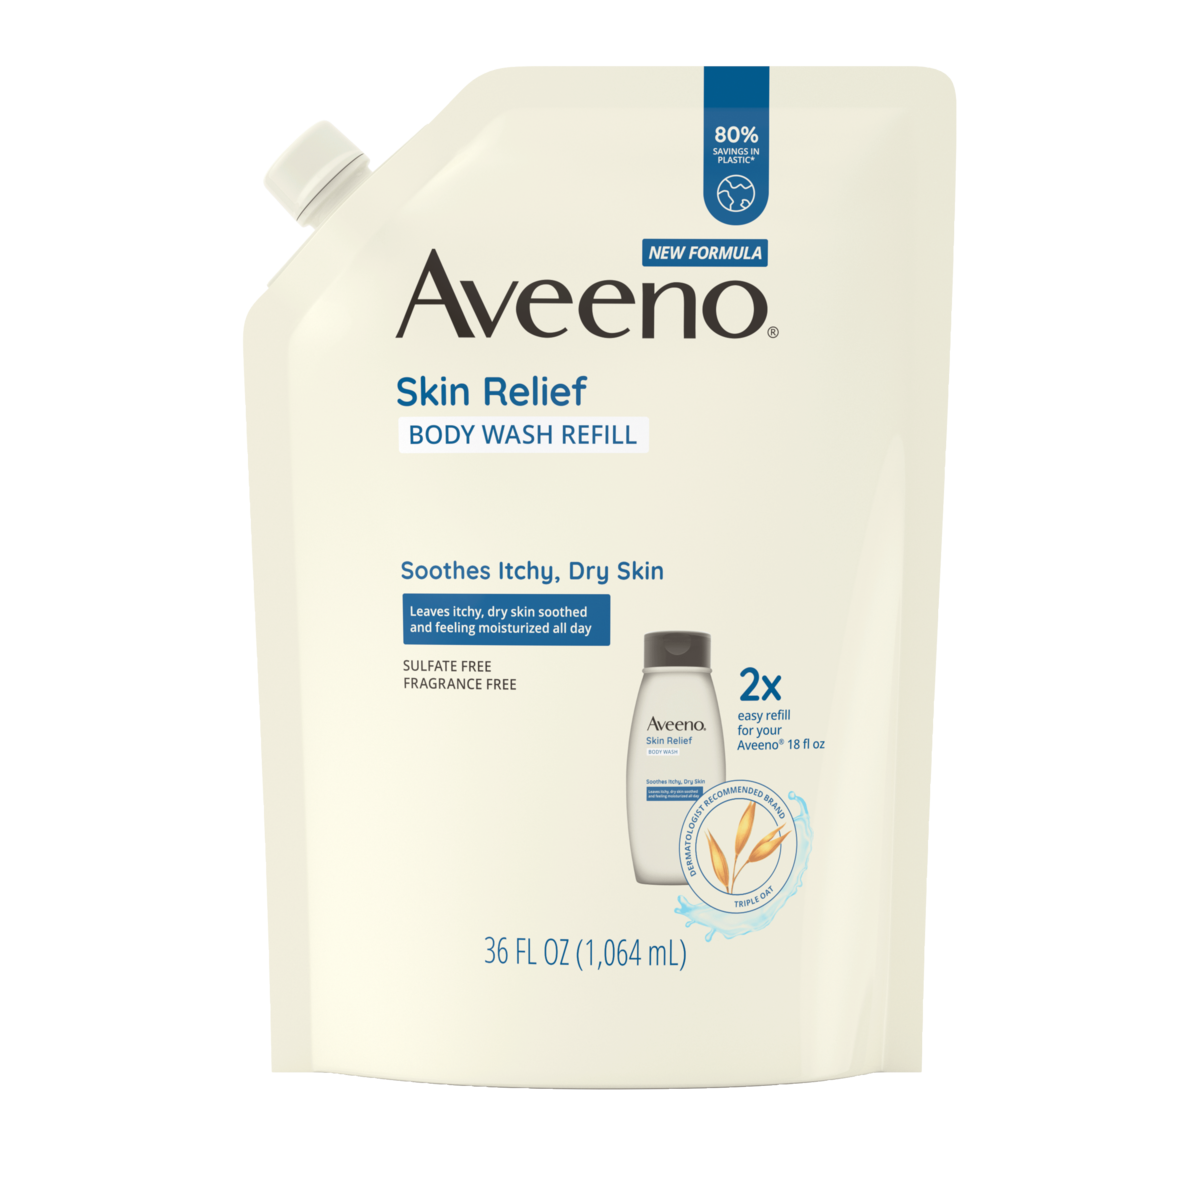 Aveeno Skin Relief Fragrance-Free Body Wash Refill Front